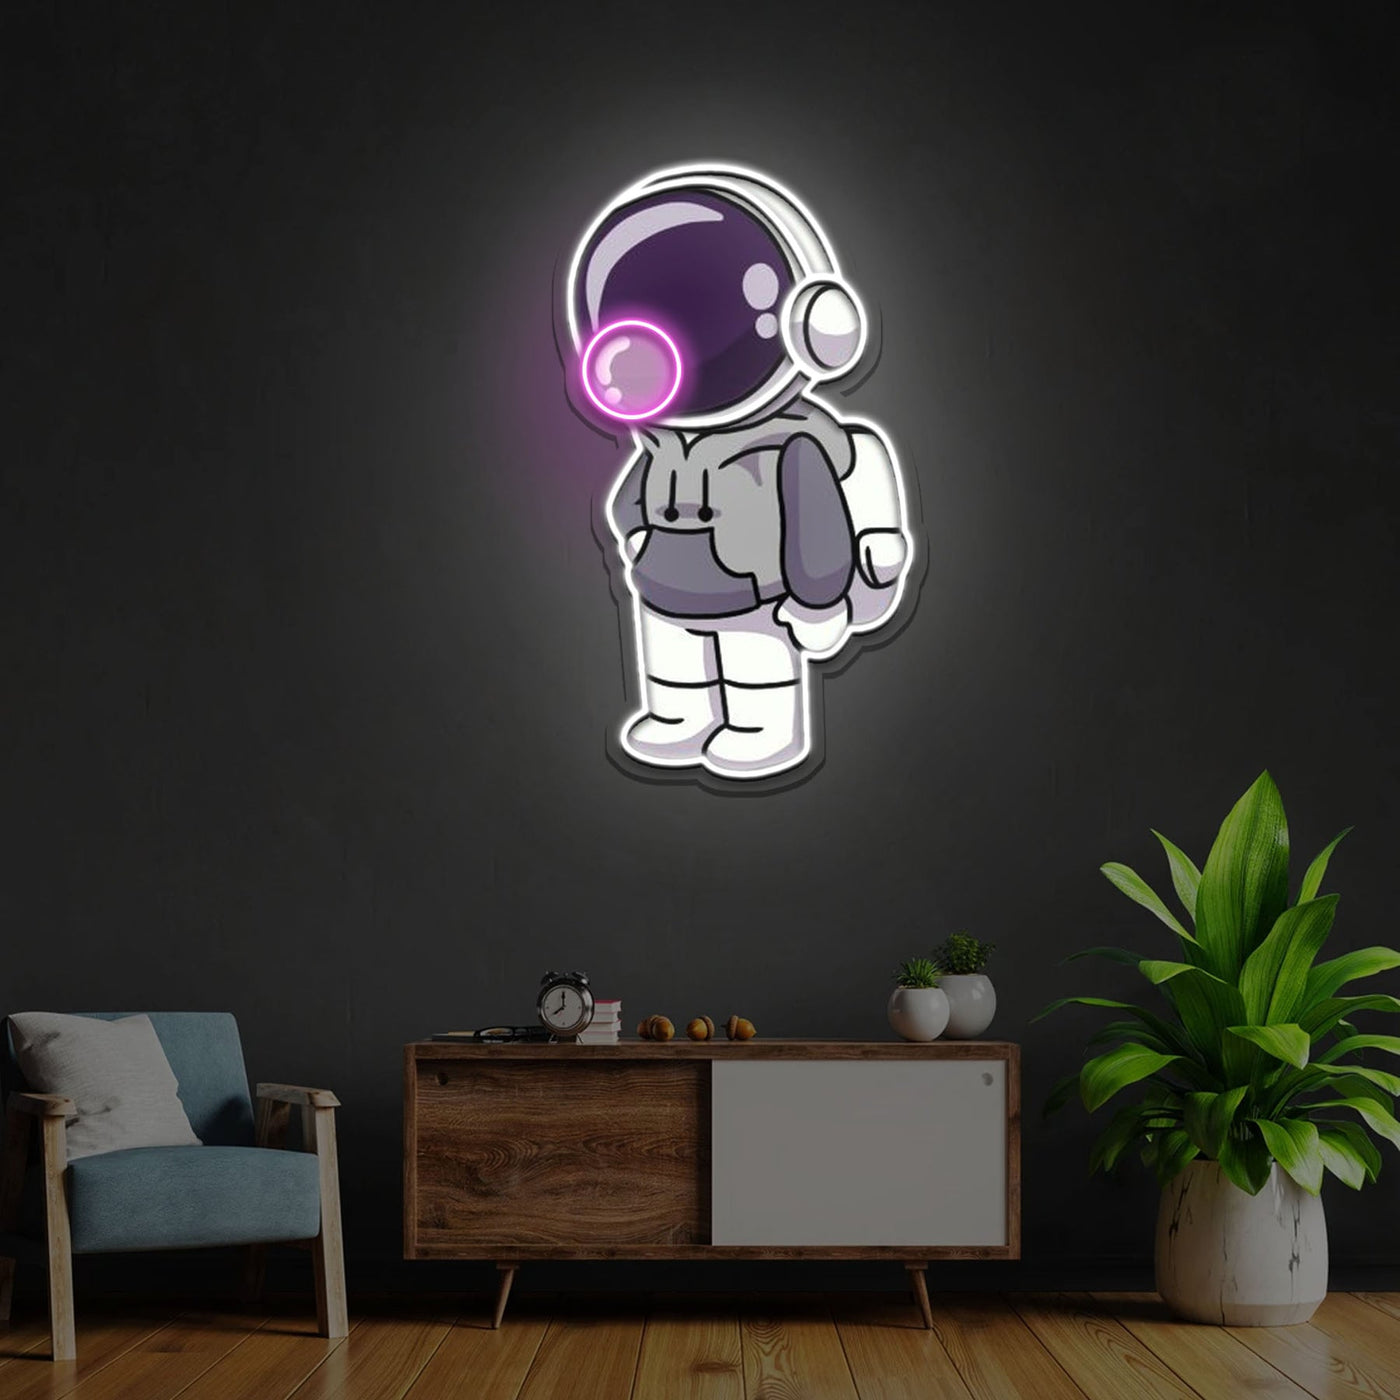 Gum in space Neon Sign x Acrylic Artwork - 2ftLED Neon x Acrylic Print